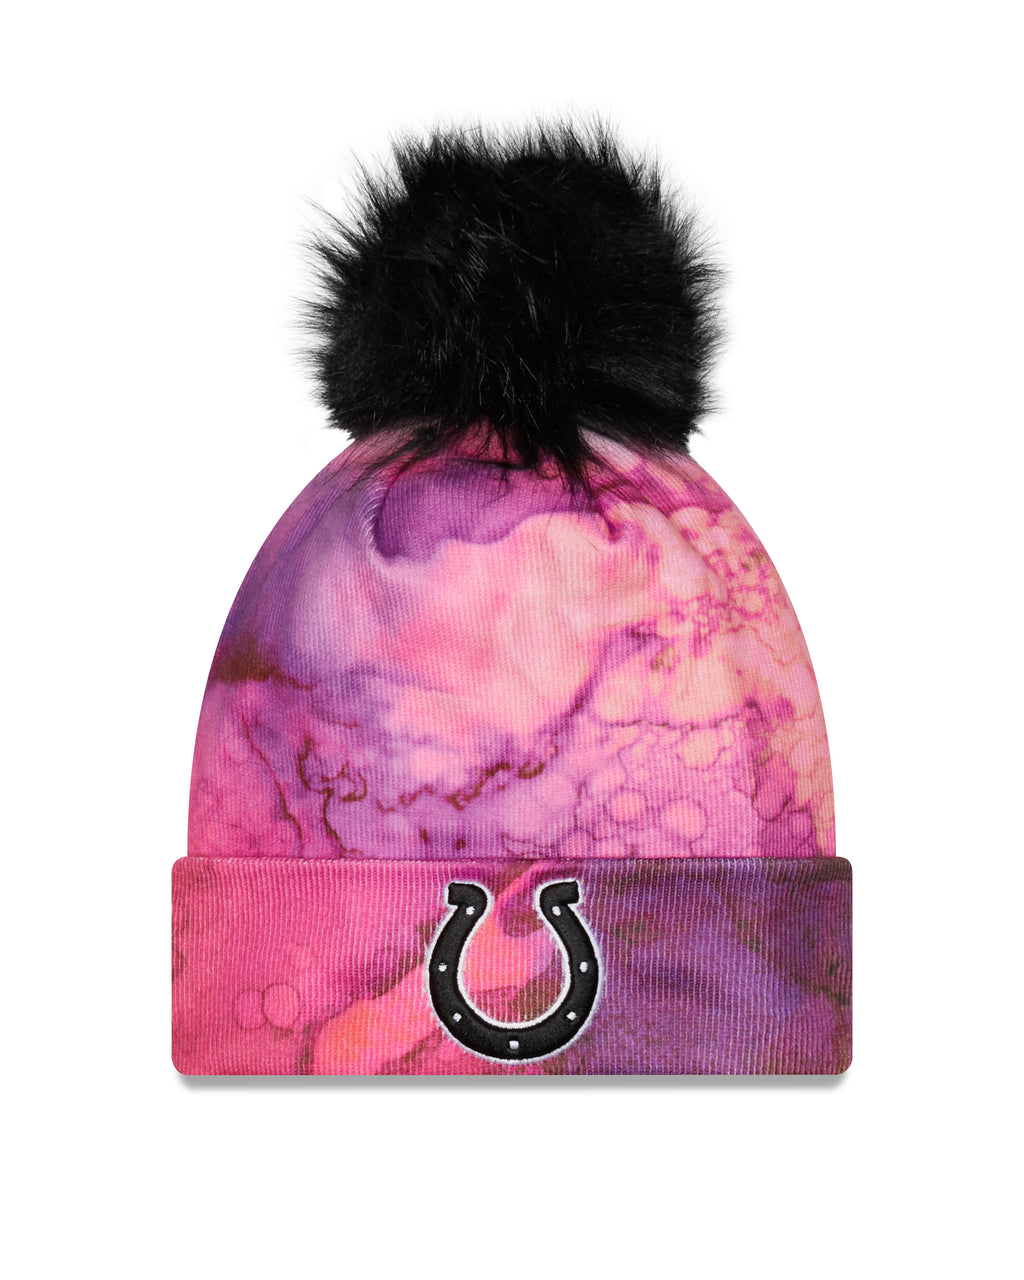 New Era NFL Indianapolis Colts Pom Knit Beanie Multicolor